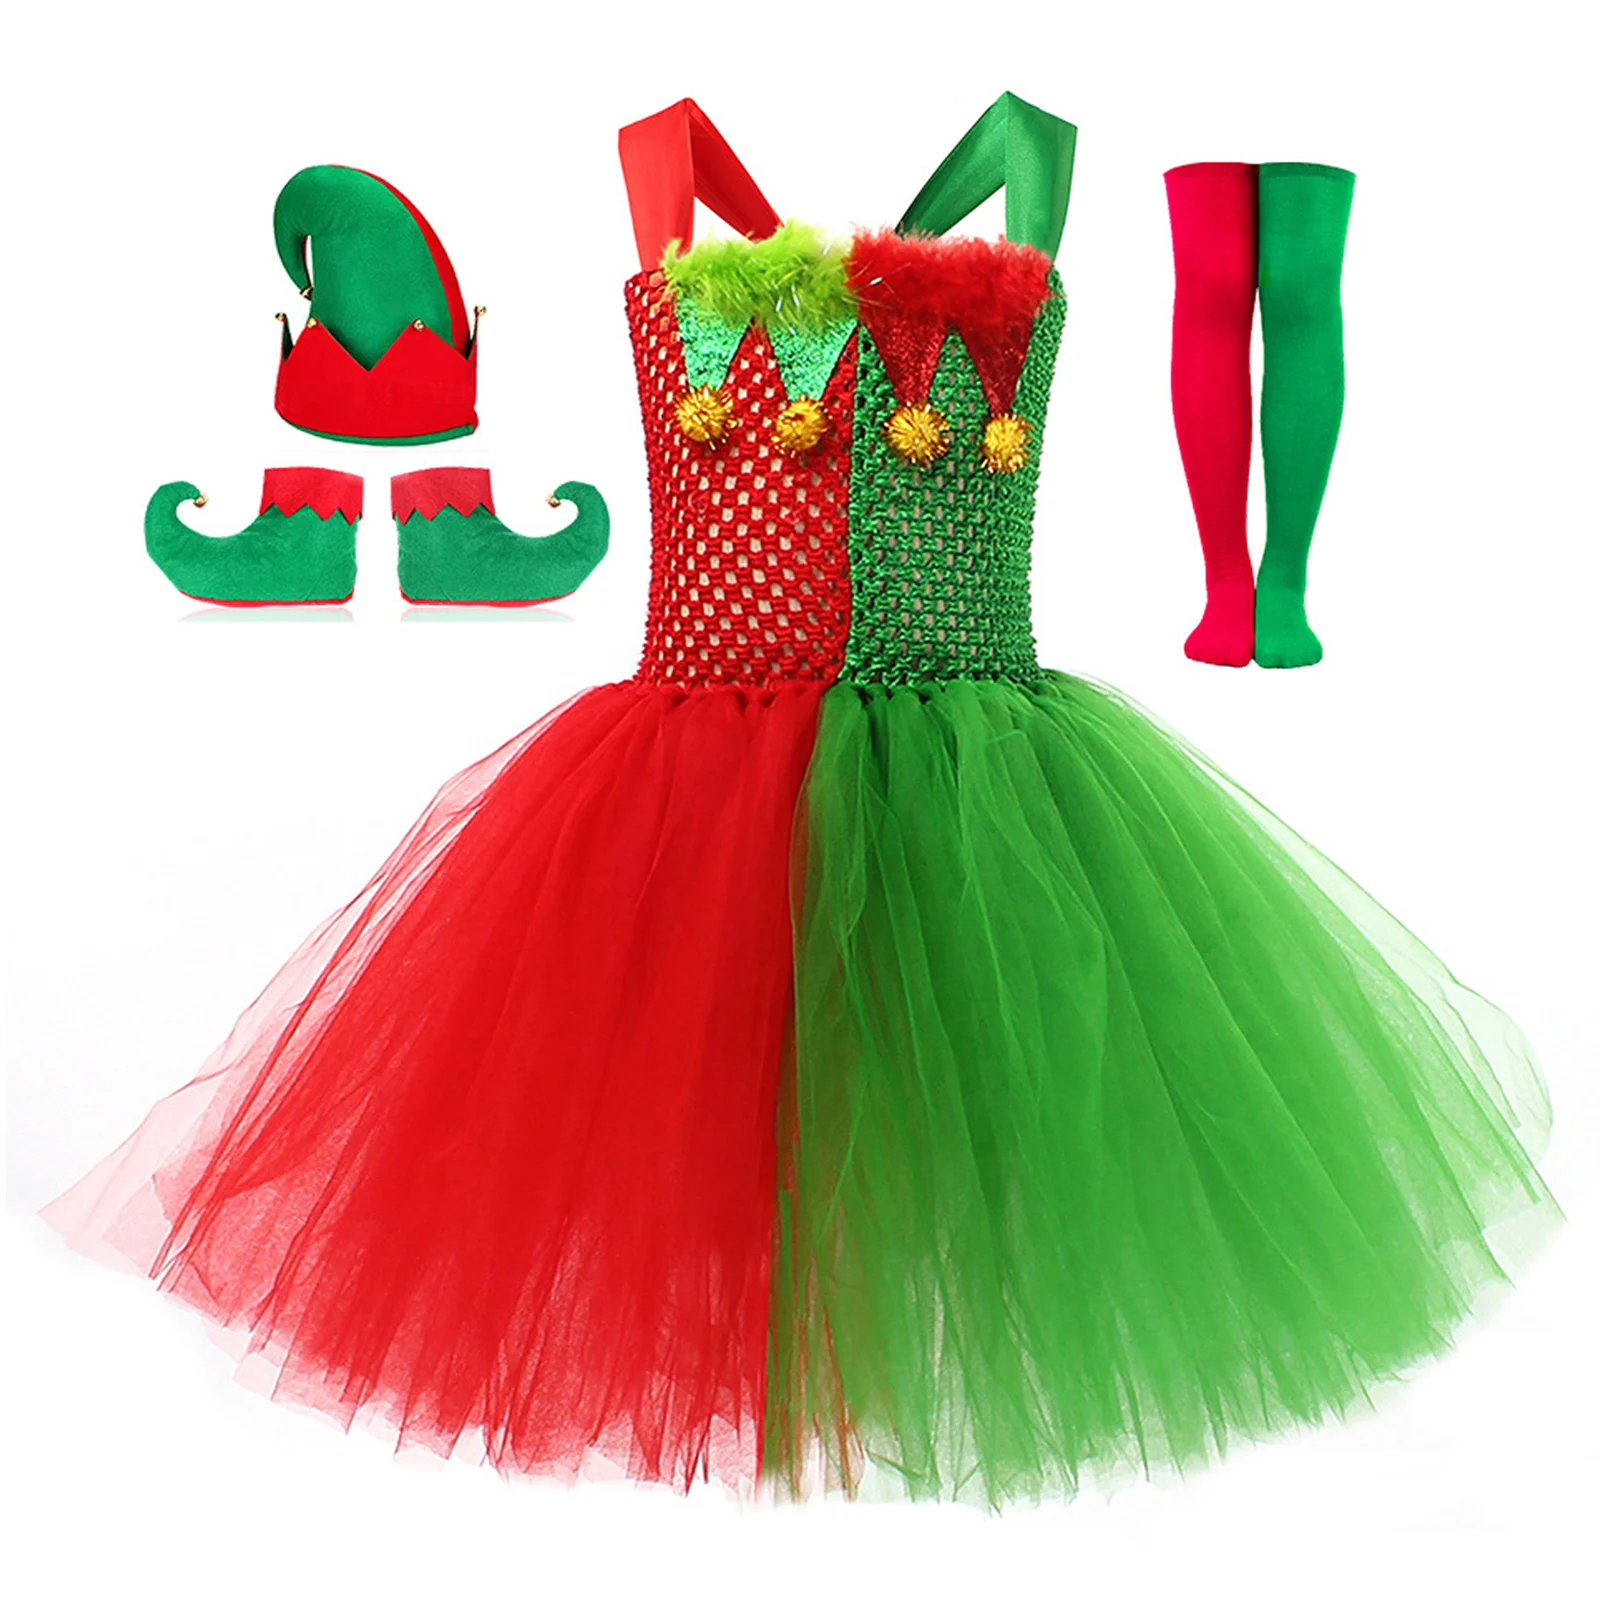 

Christmas Elf Clothing Kids Girls Cutout Tutu Dress Hat Shoes Stockings Suit for Halloween Xmas Masquerade Party Cosplay Costume